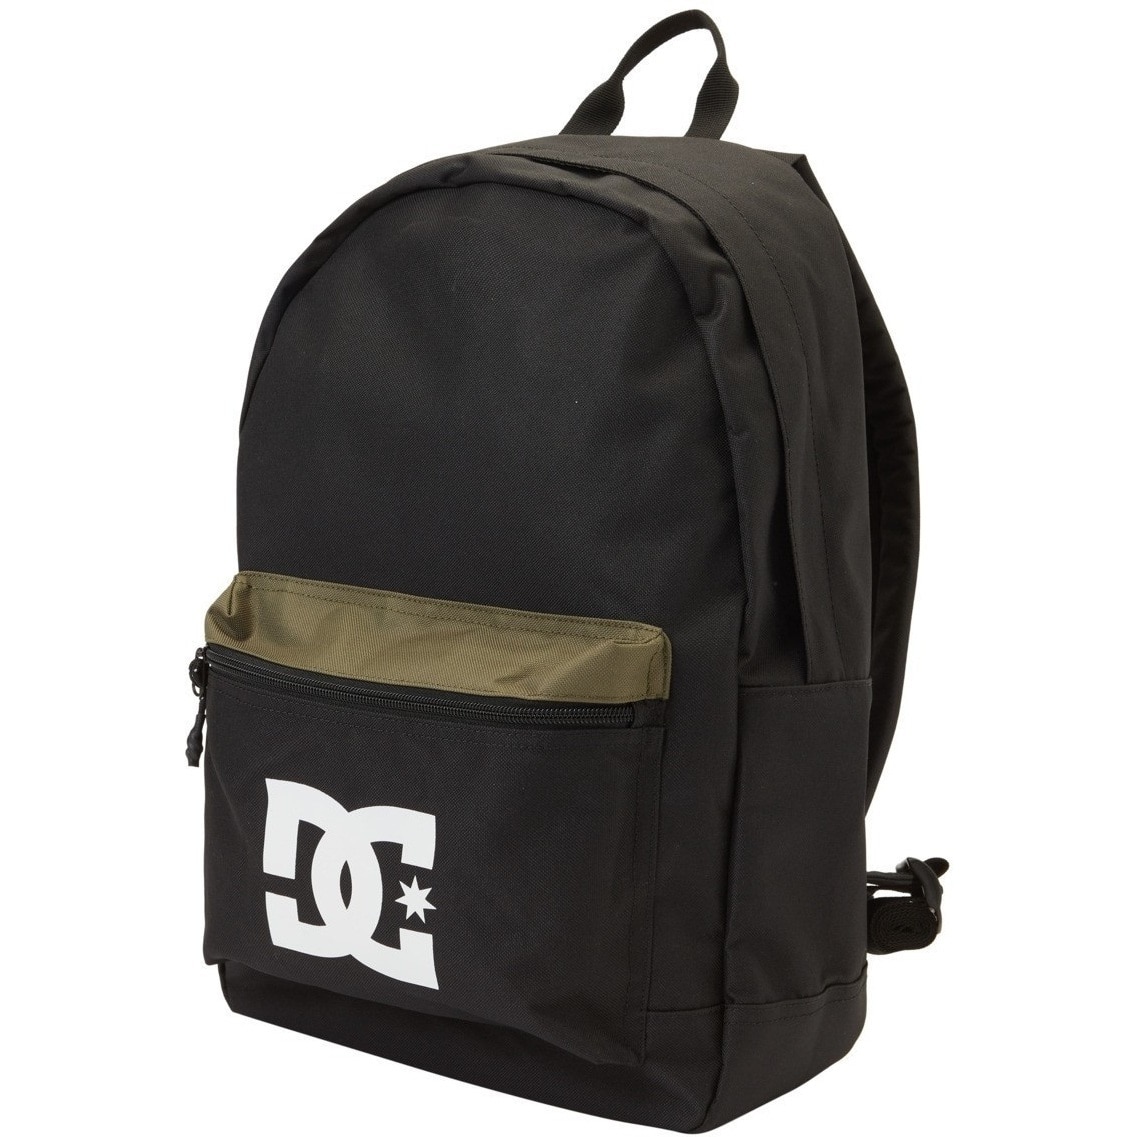 Aptitude Bloodstained You're welcome Rucsac barbati DC Shoes Nickel 20 L 26936, Negru, One size - eMAG.ro